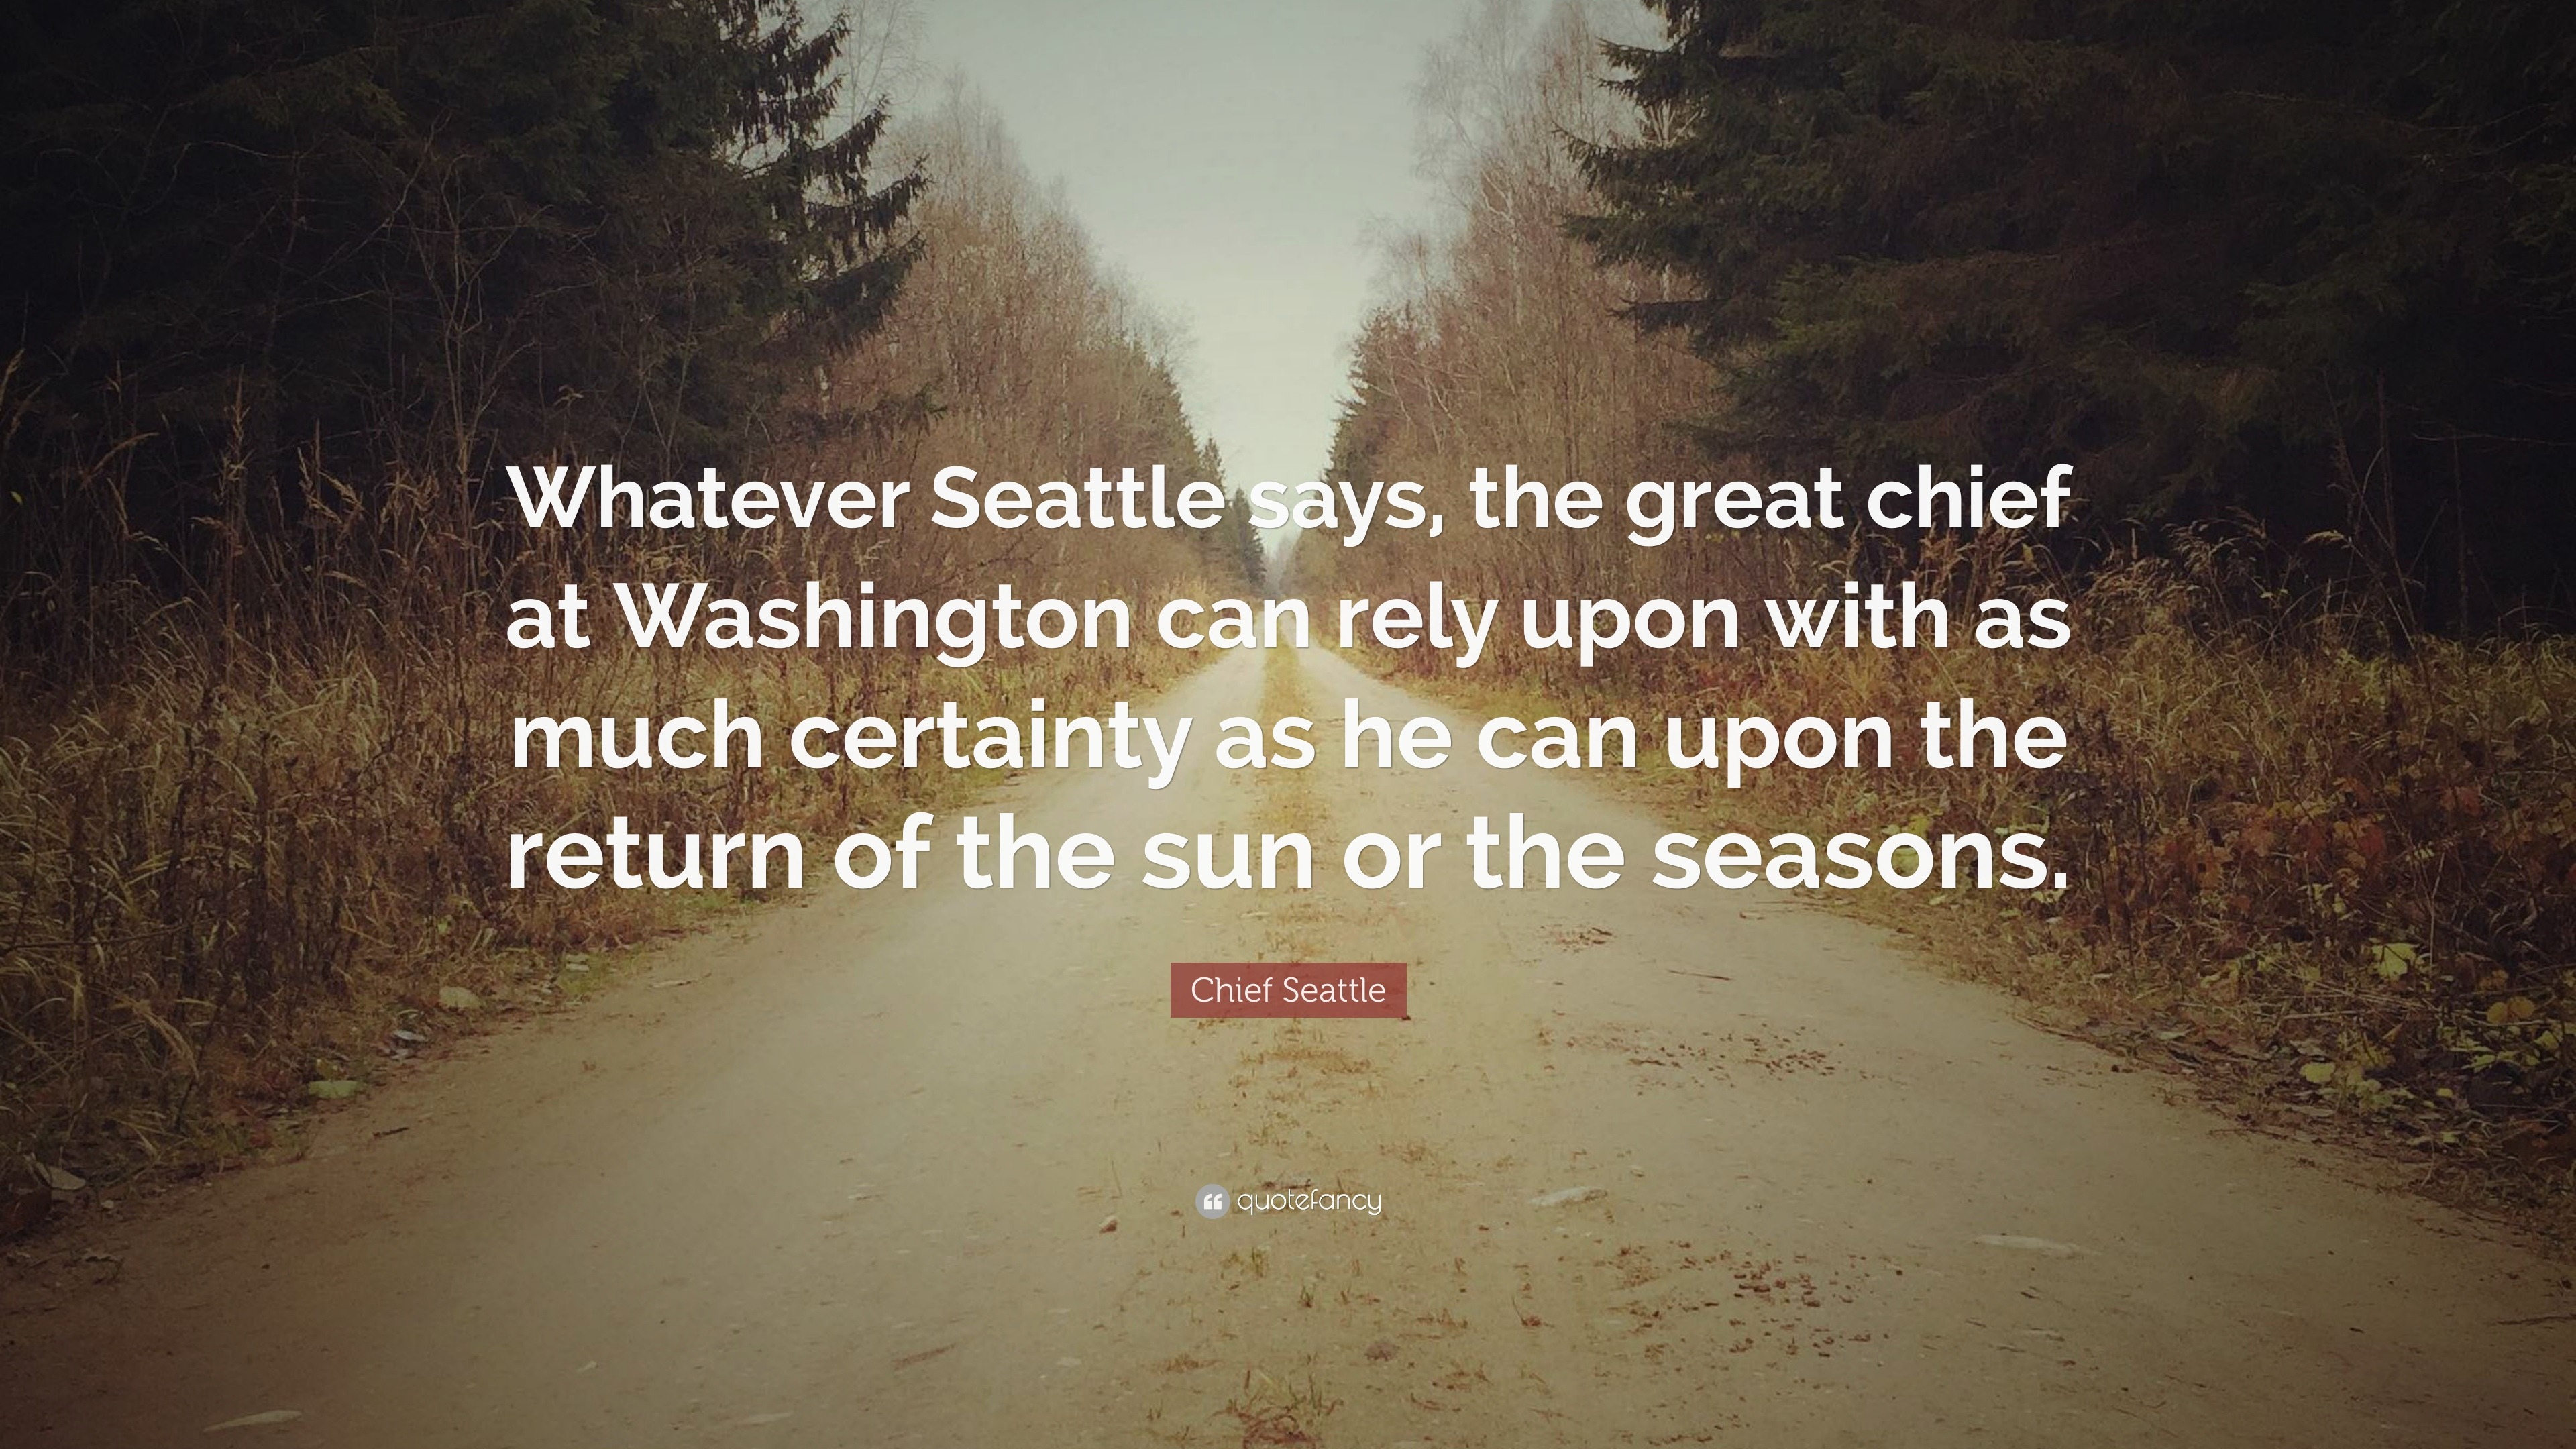 Chief Seattle Quote: “Whatever Seattle says, the great chief at